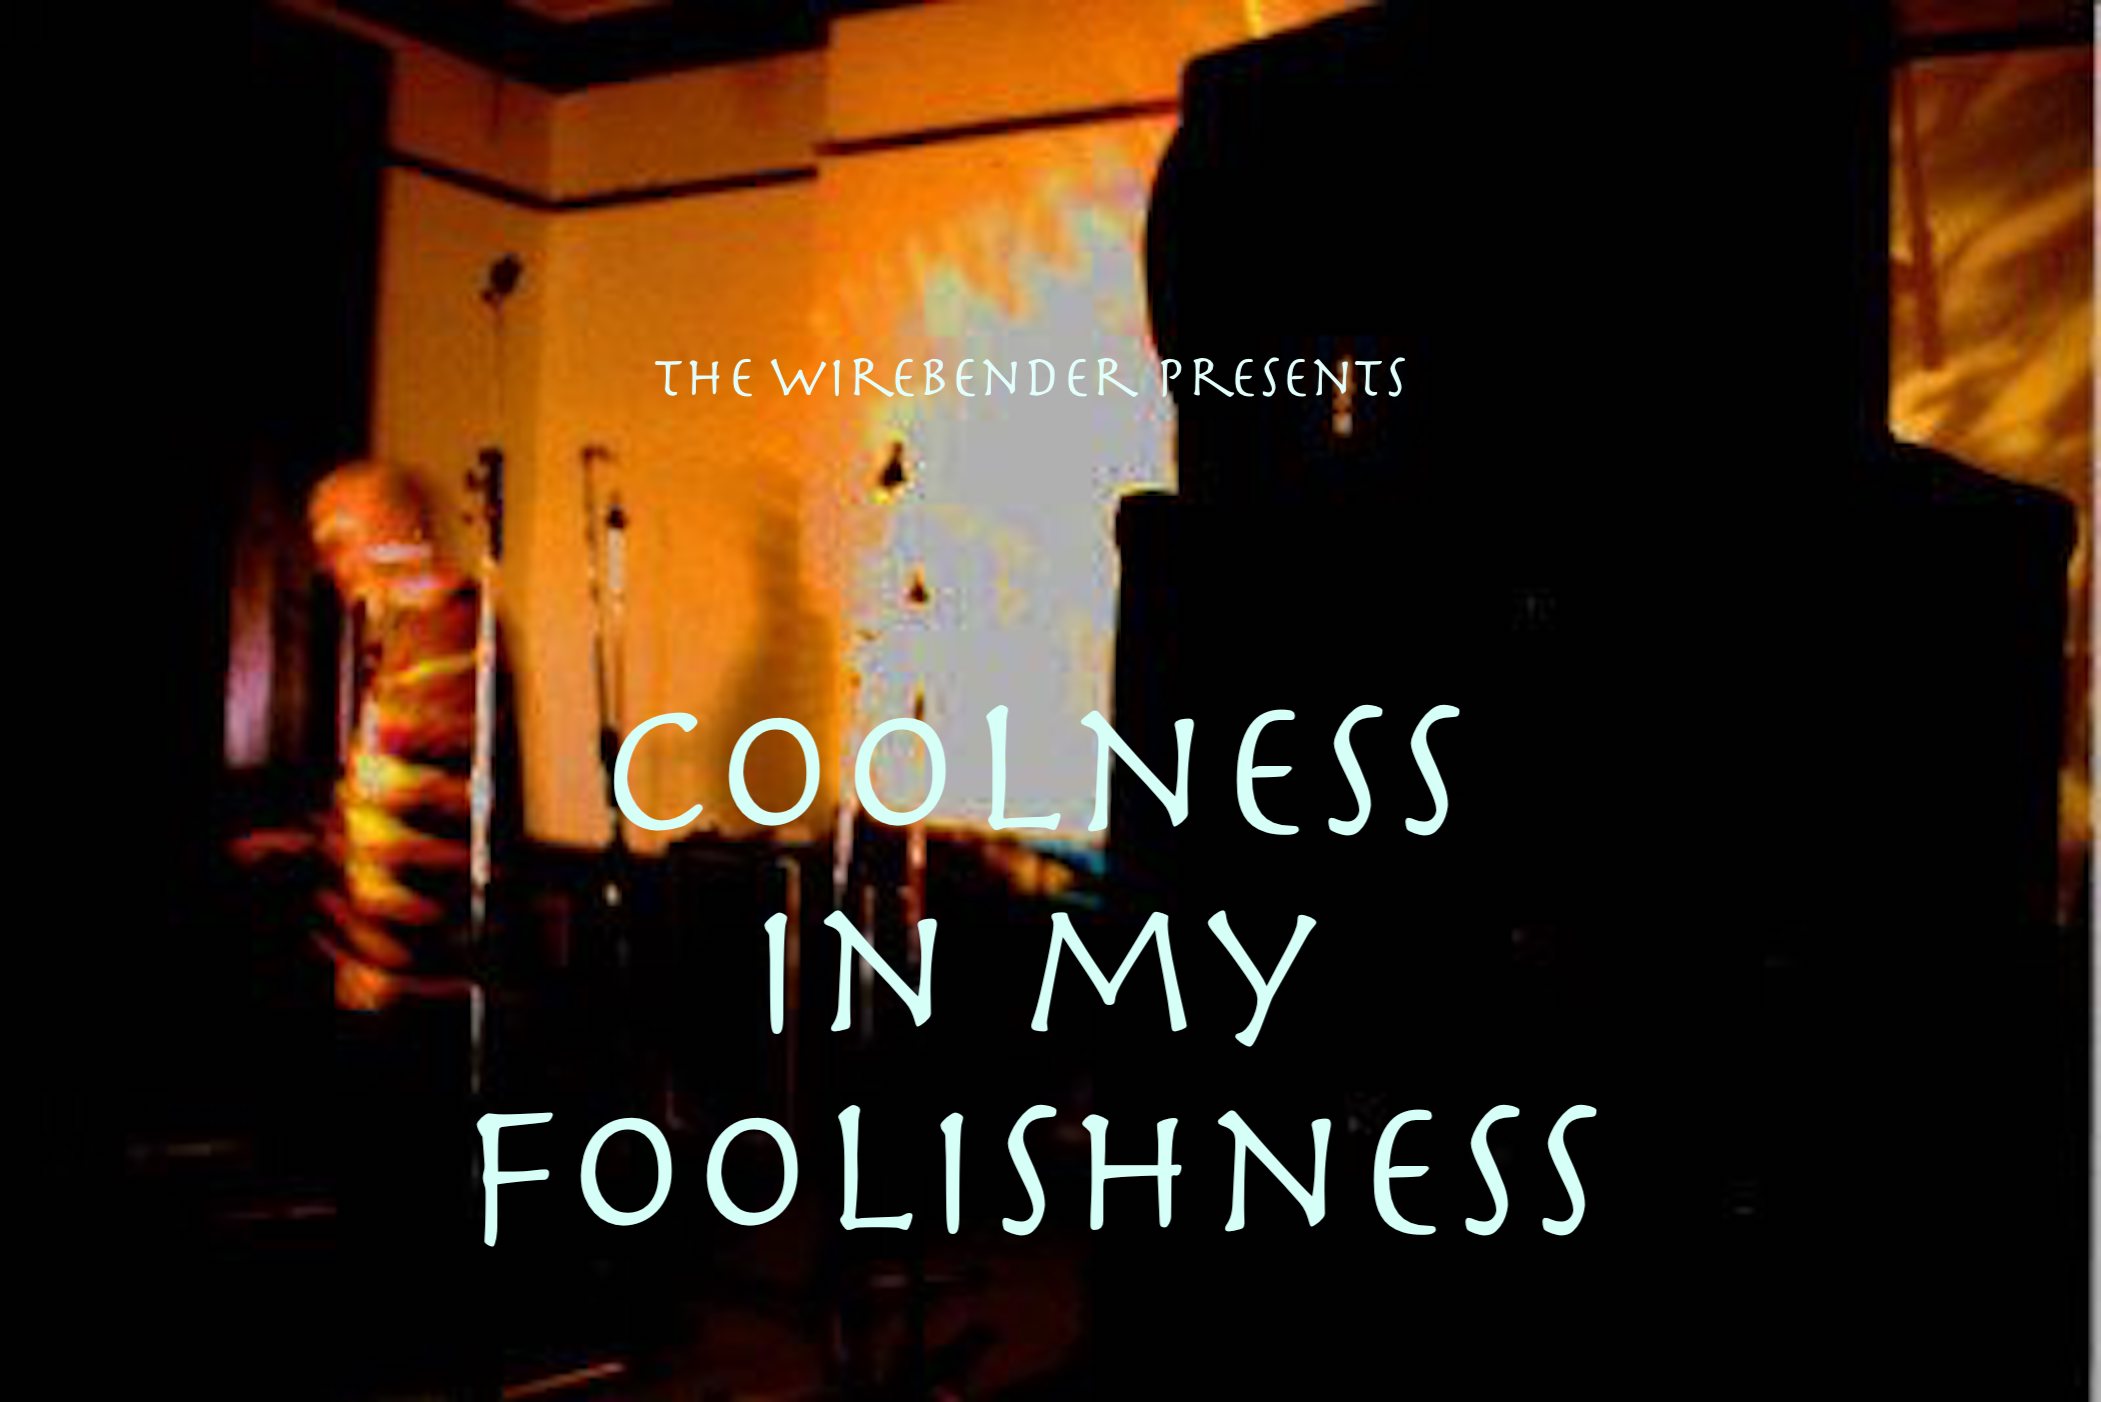 The Wirebender presents Coolness in my Foolishness